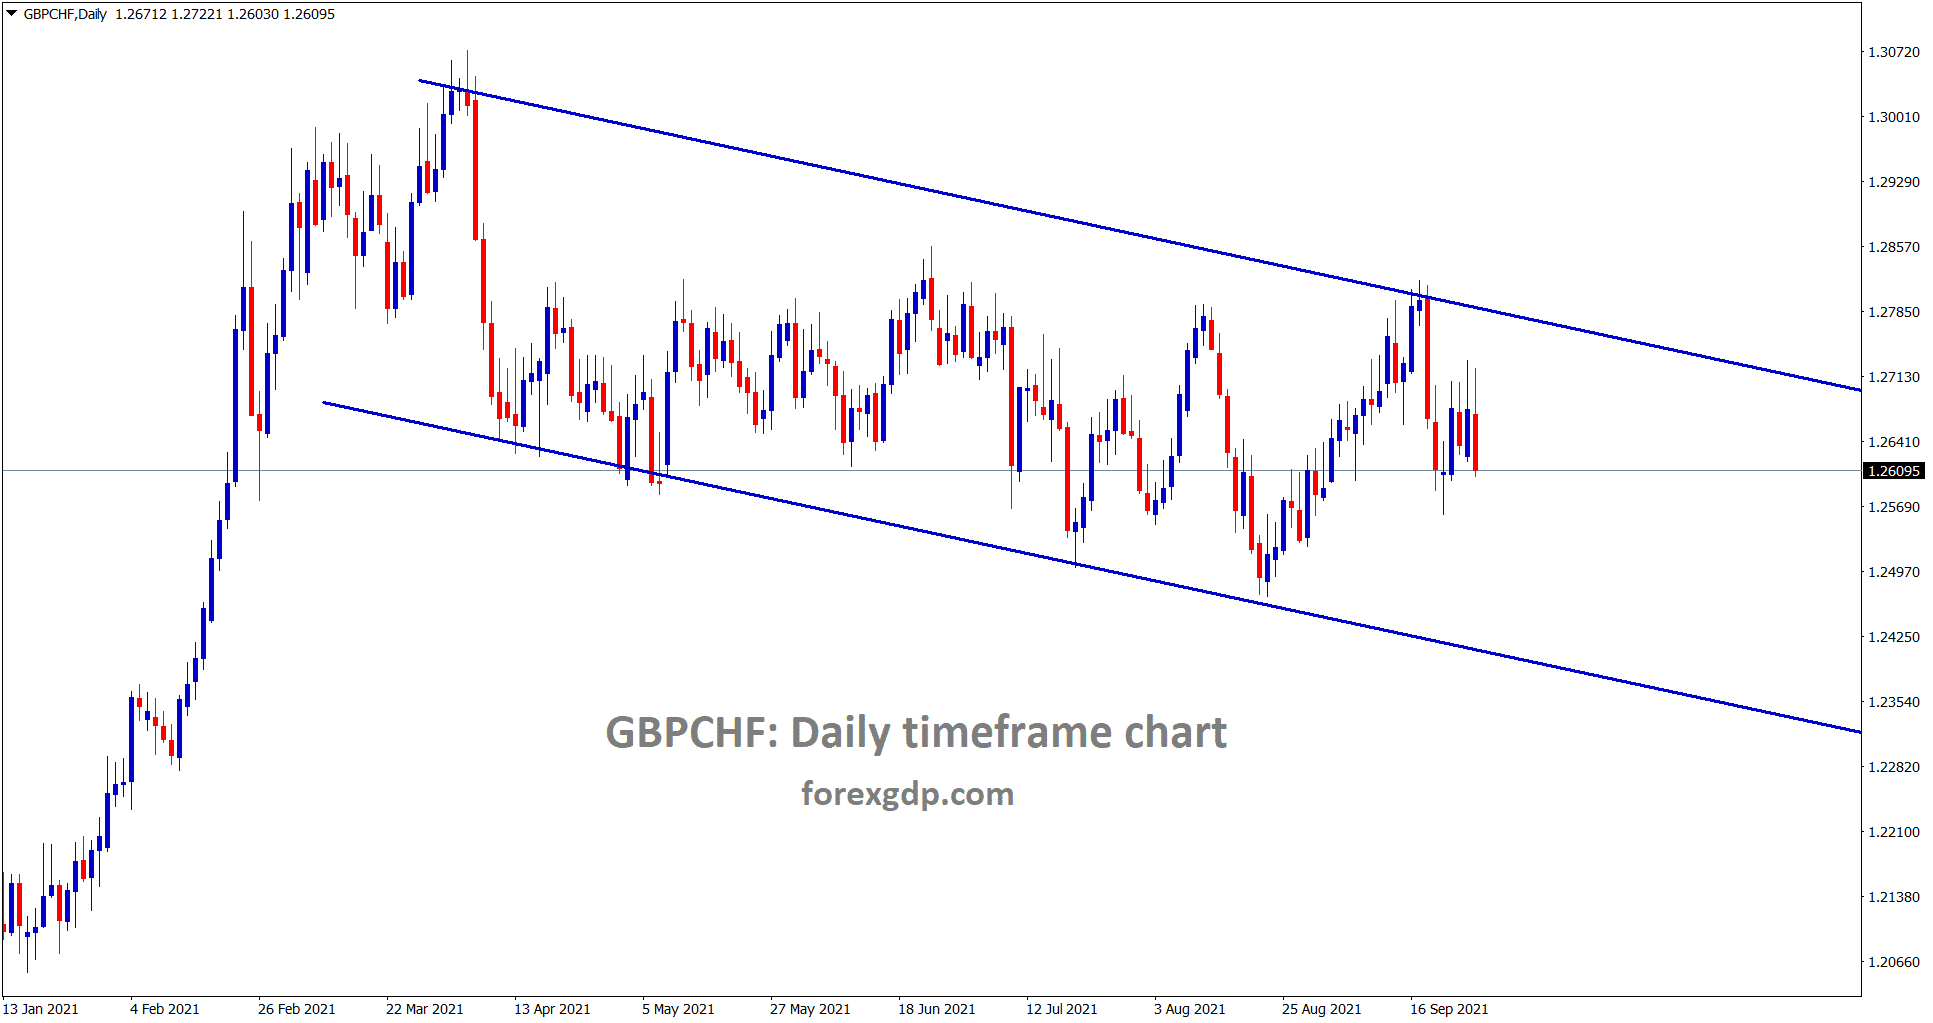 GBPCHF is moving in a downtrend line